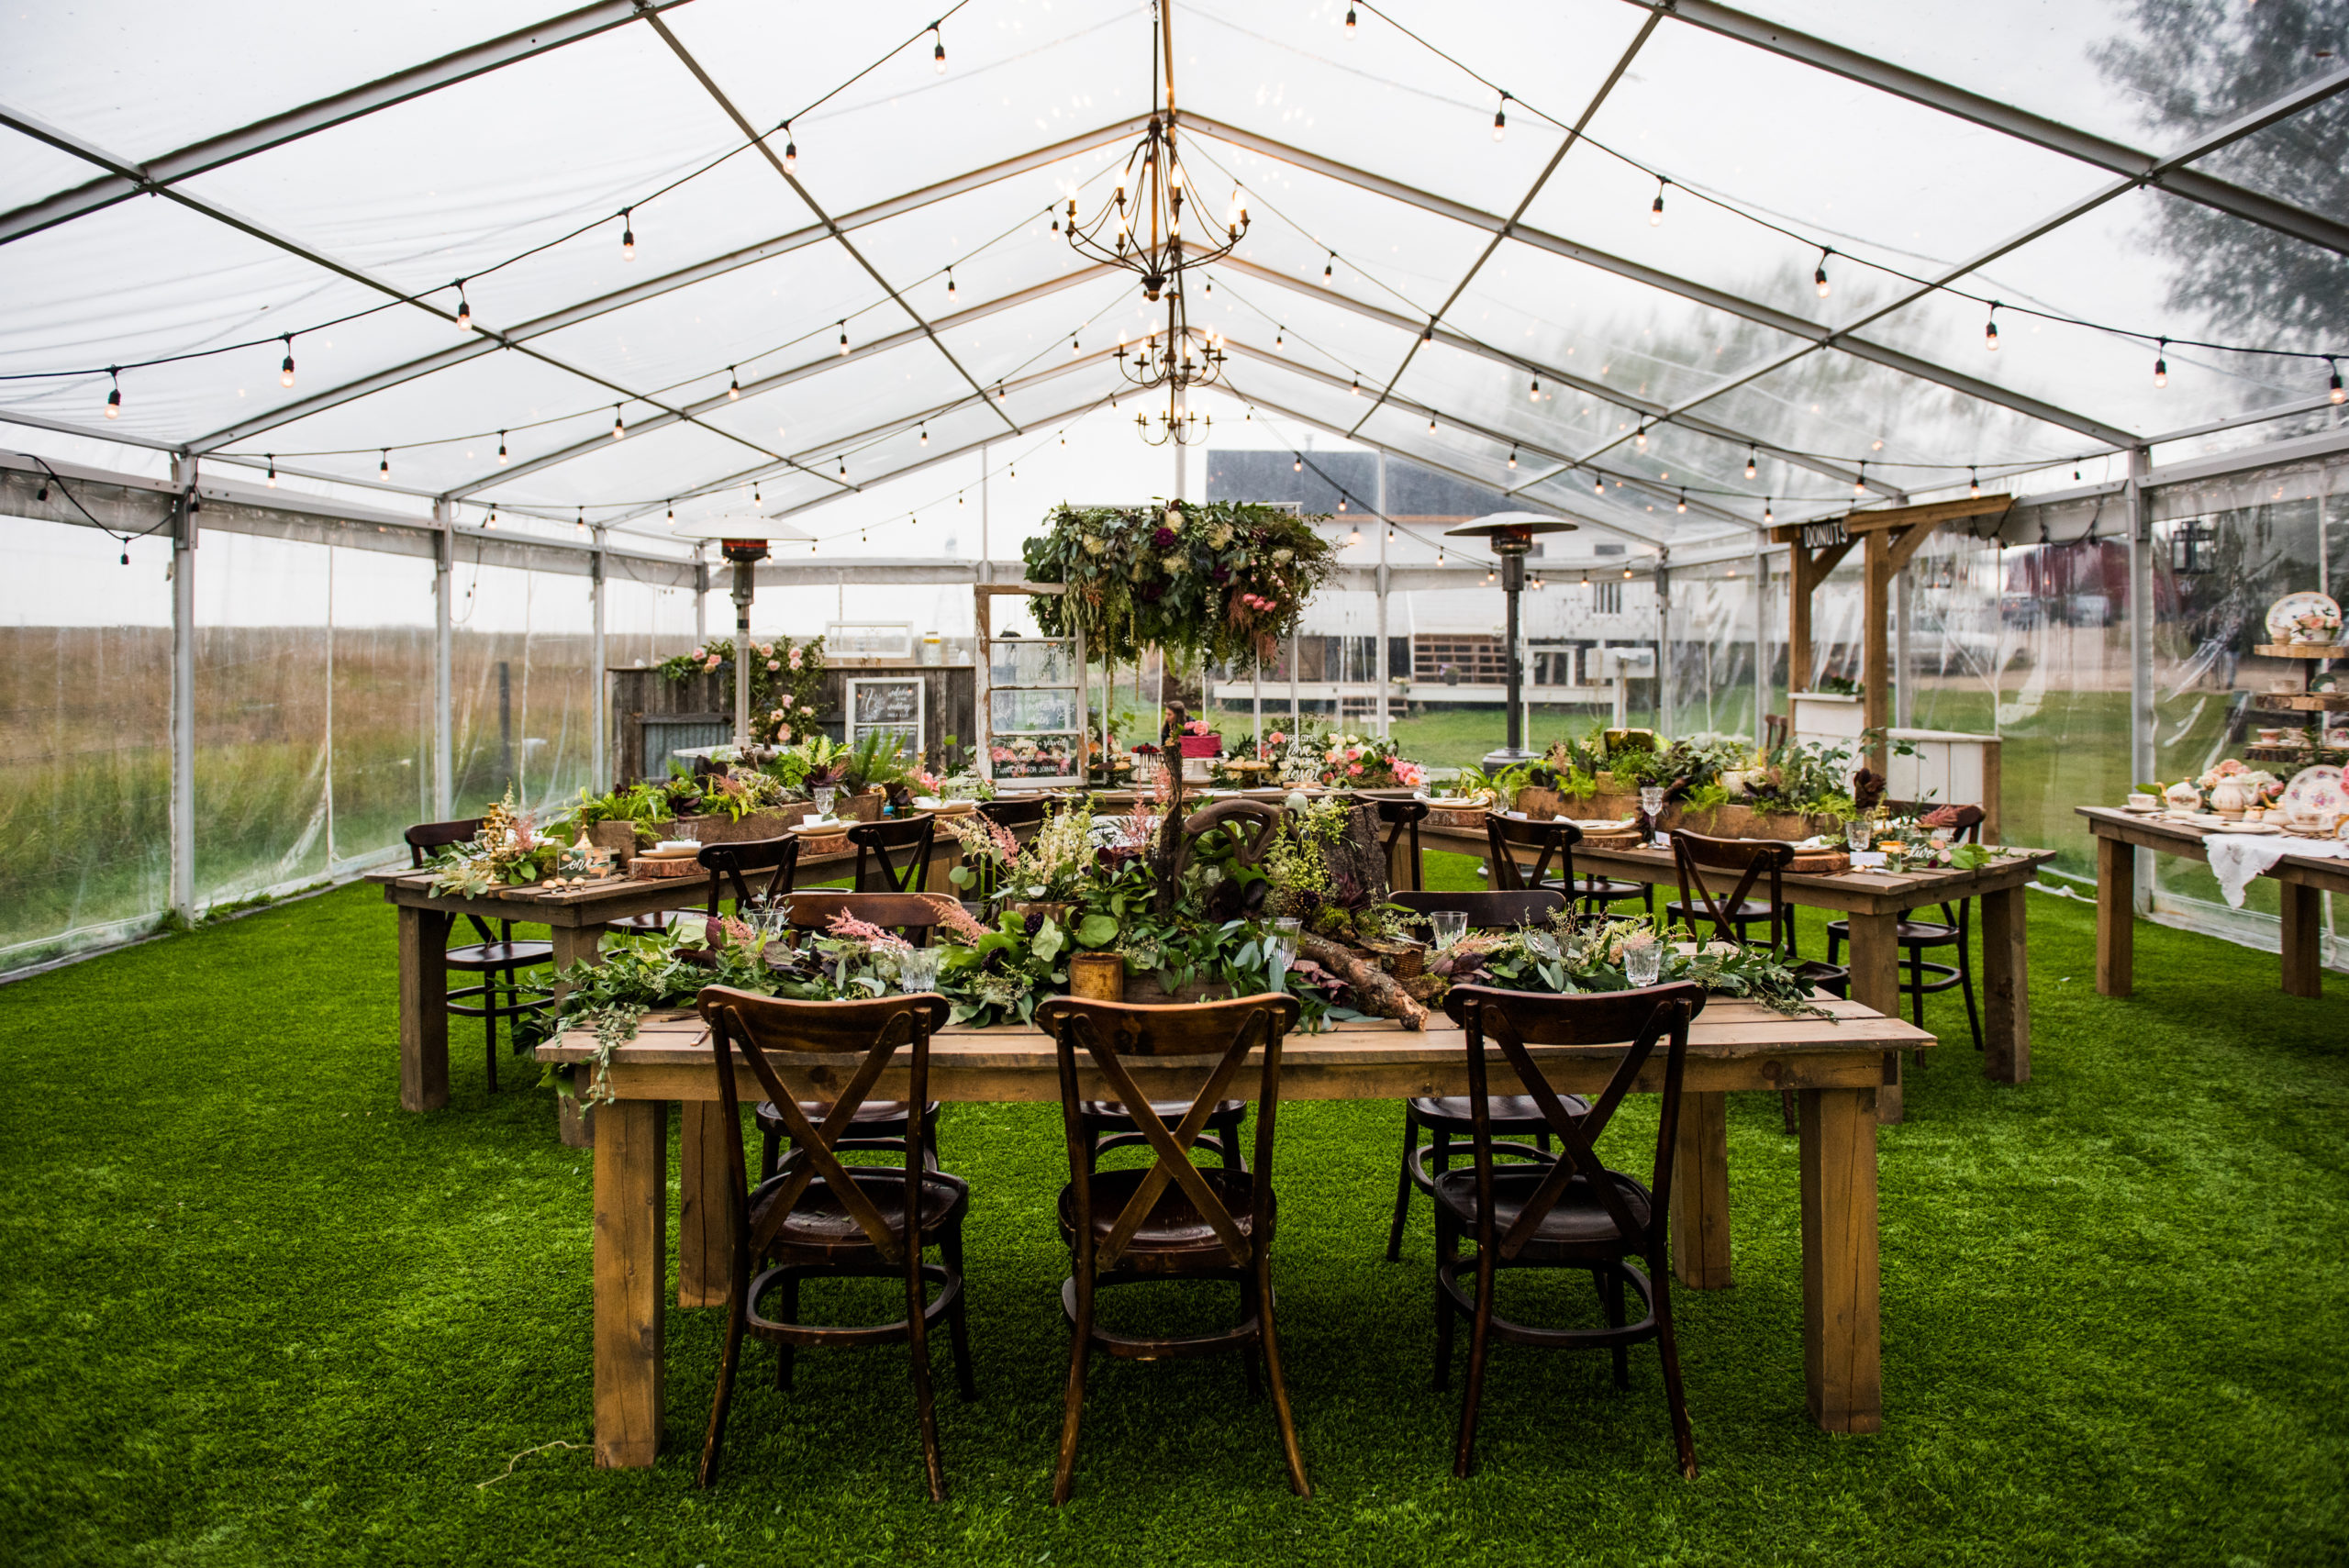 wedding reception set up for an intimate wedding with covid restrictions. Decorated with wild greens and earthy fixtures set in a clear tent with hanging globe lights.